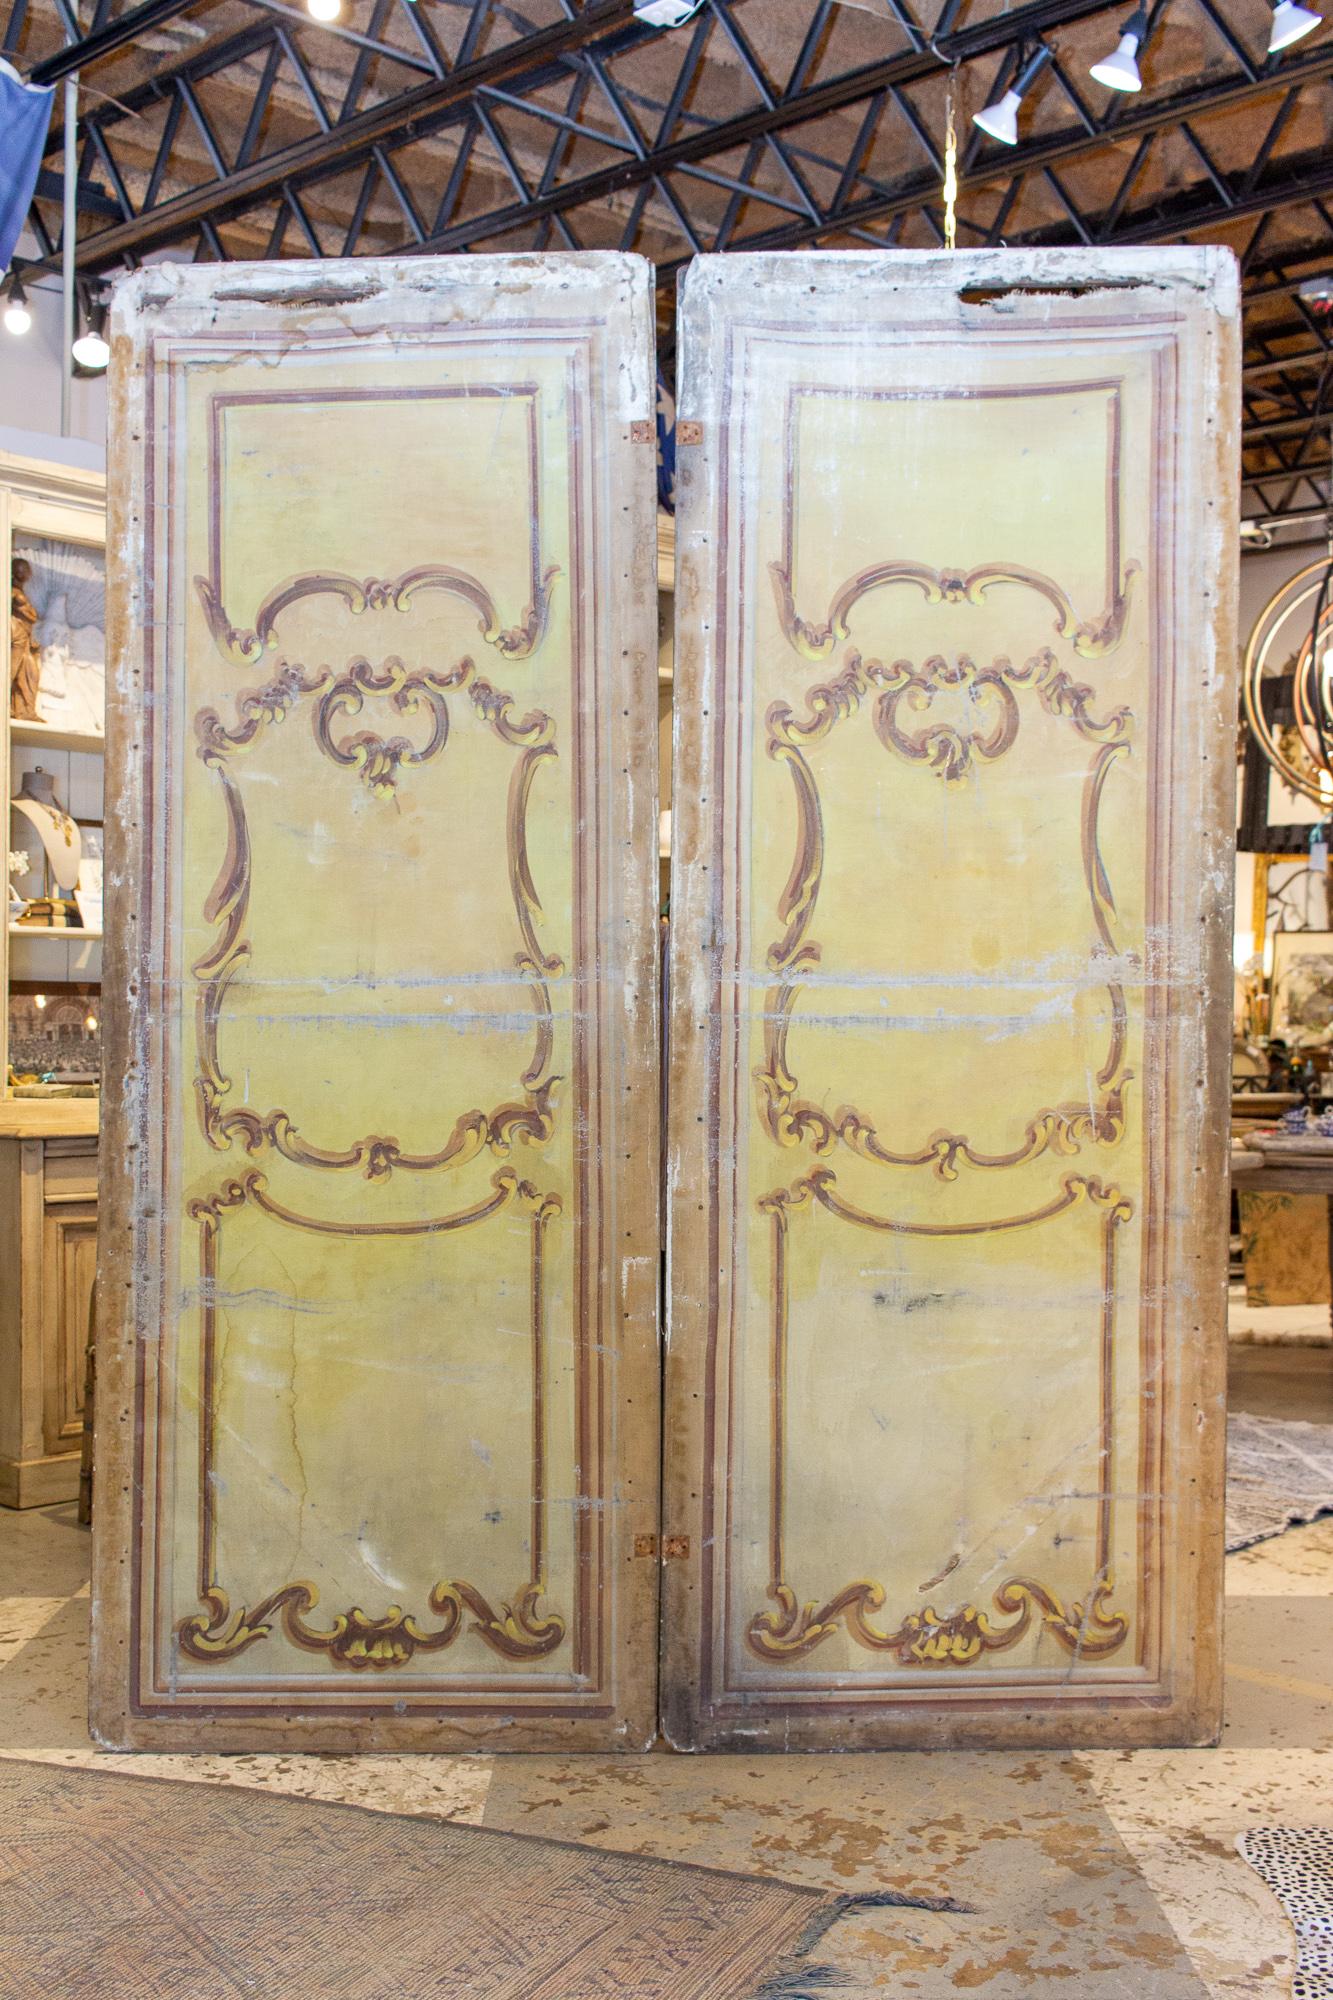 This pair of Italian hand-painted screen panels may have once been used as the backdrop for a stage play, opera or other performance, or they may also simply be oversized panels custom made for a large room divider. Either way, we love how the size